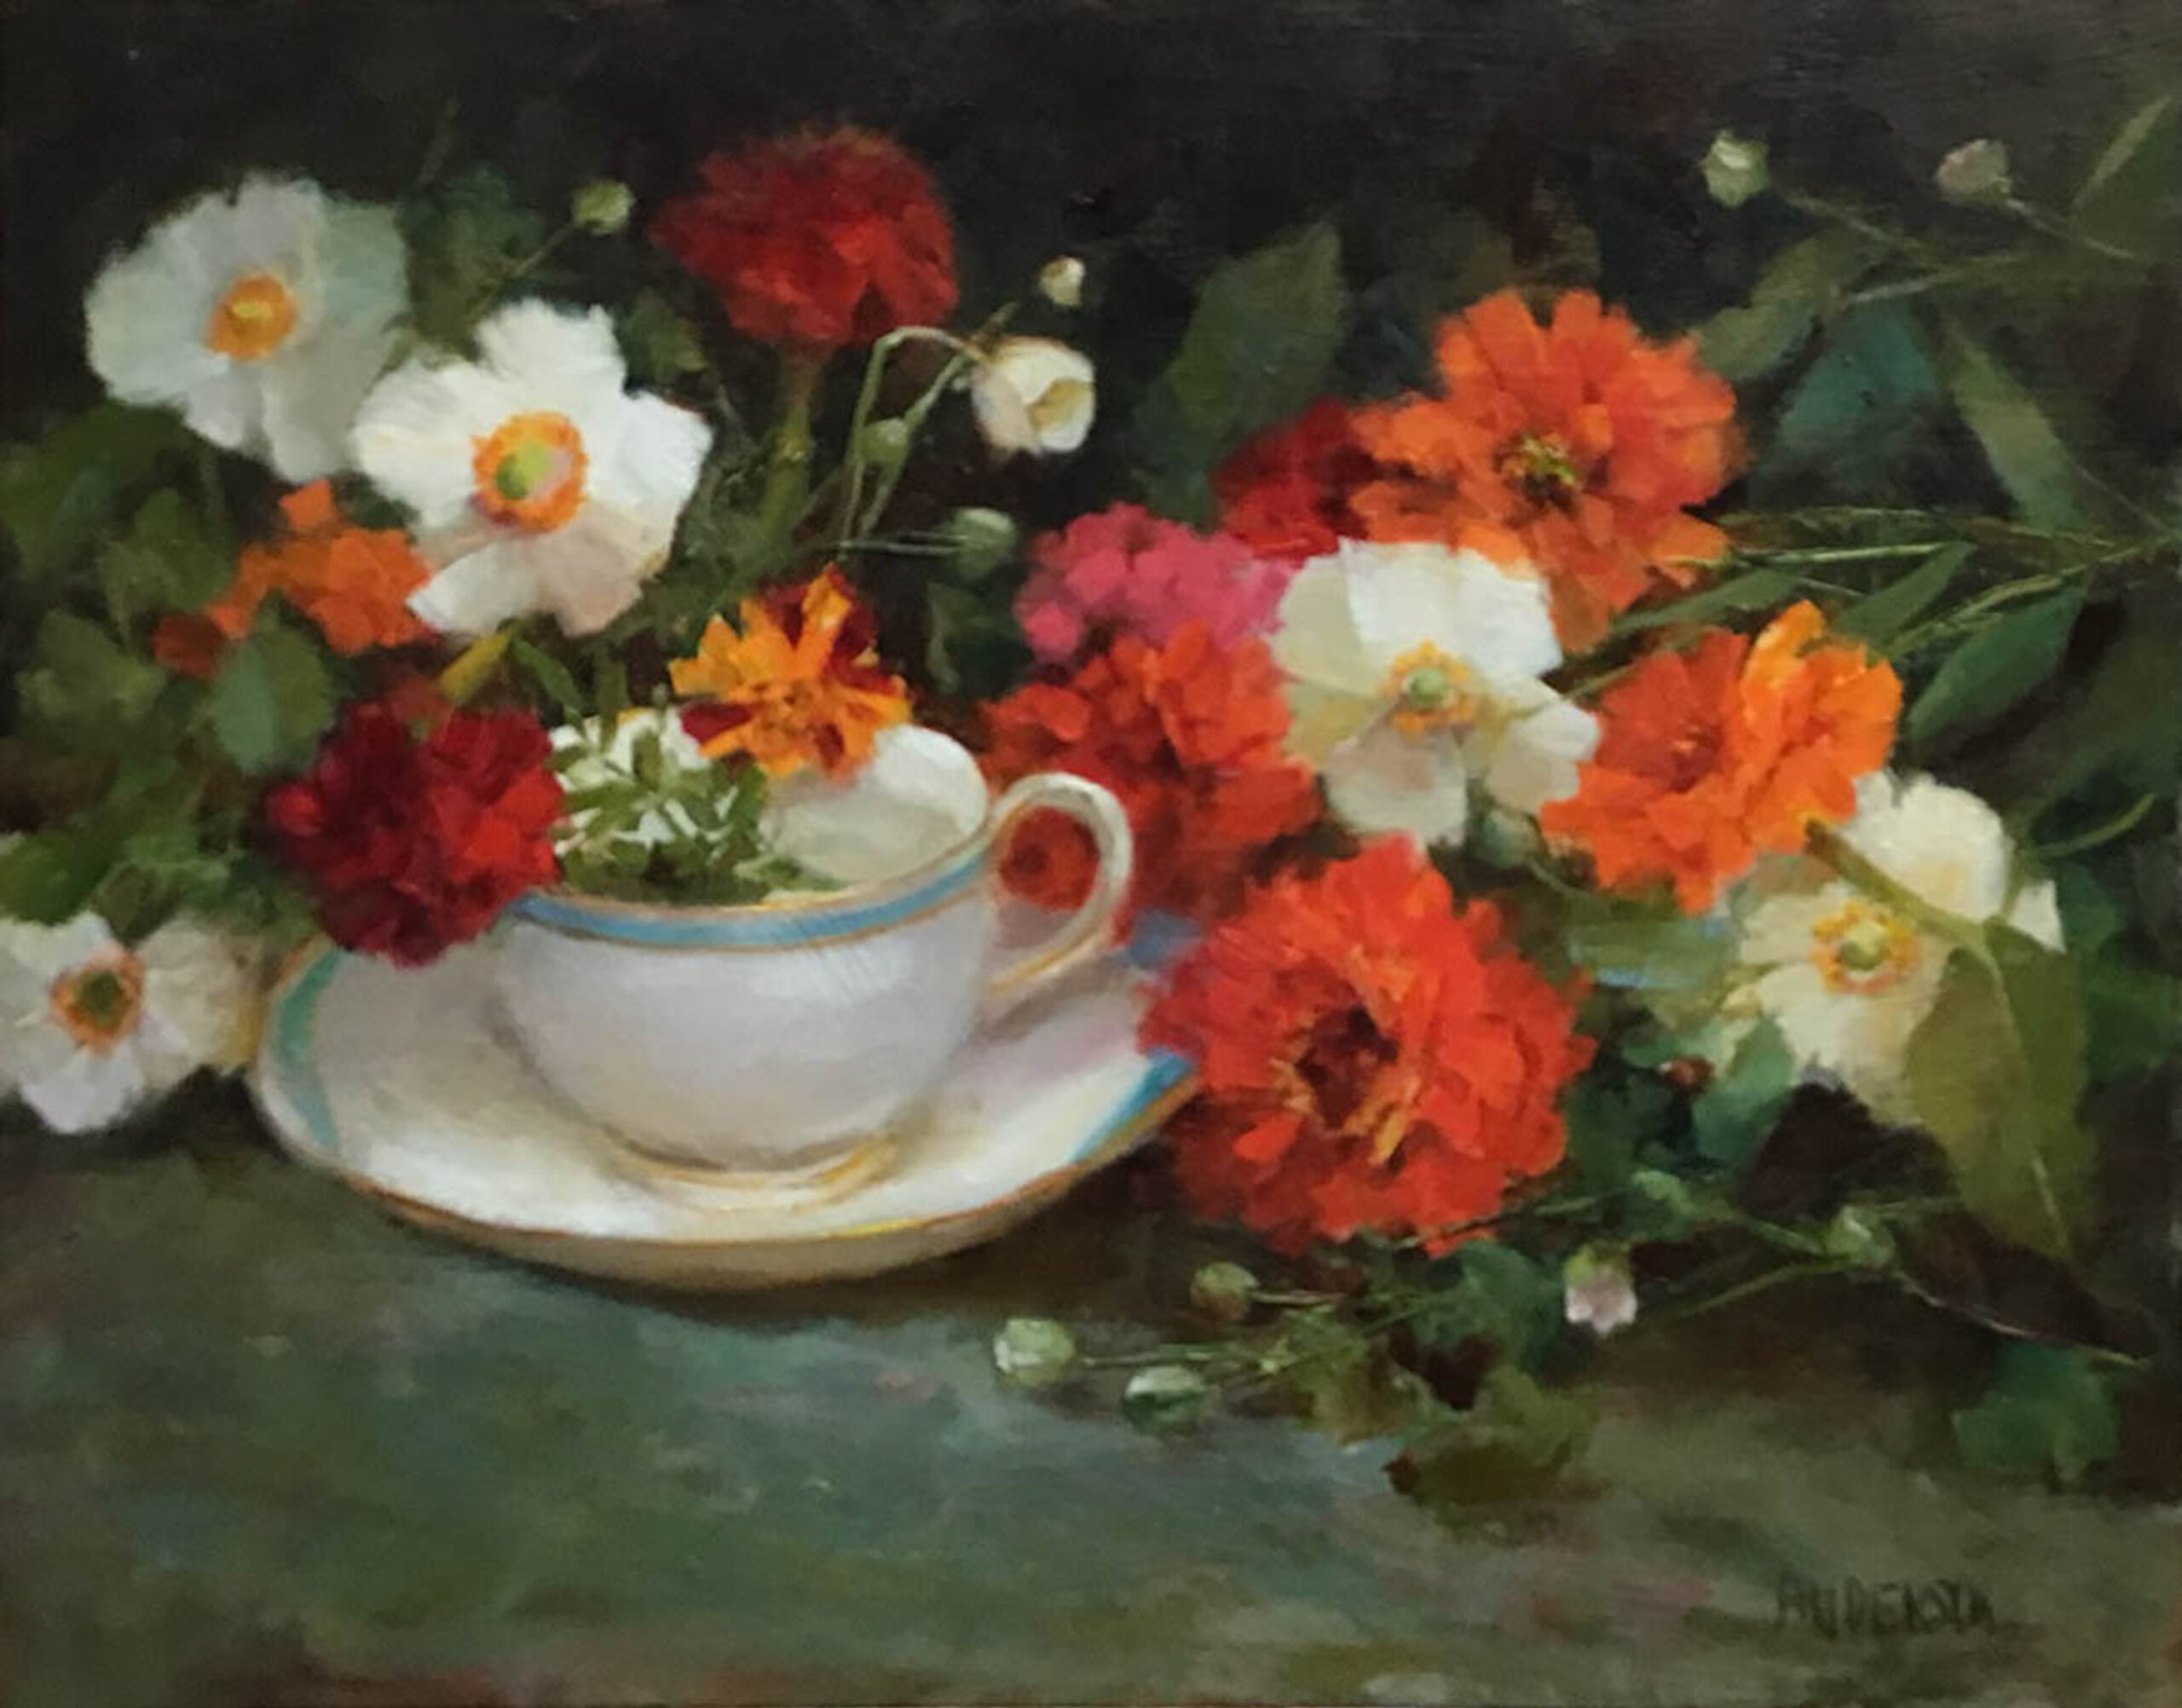 image of Zinnias and Anemones around and in a teacup